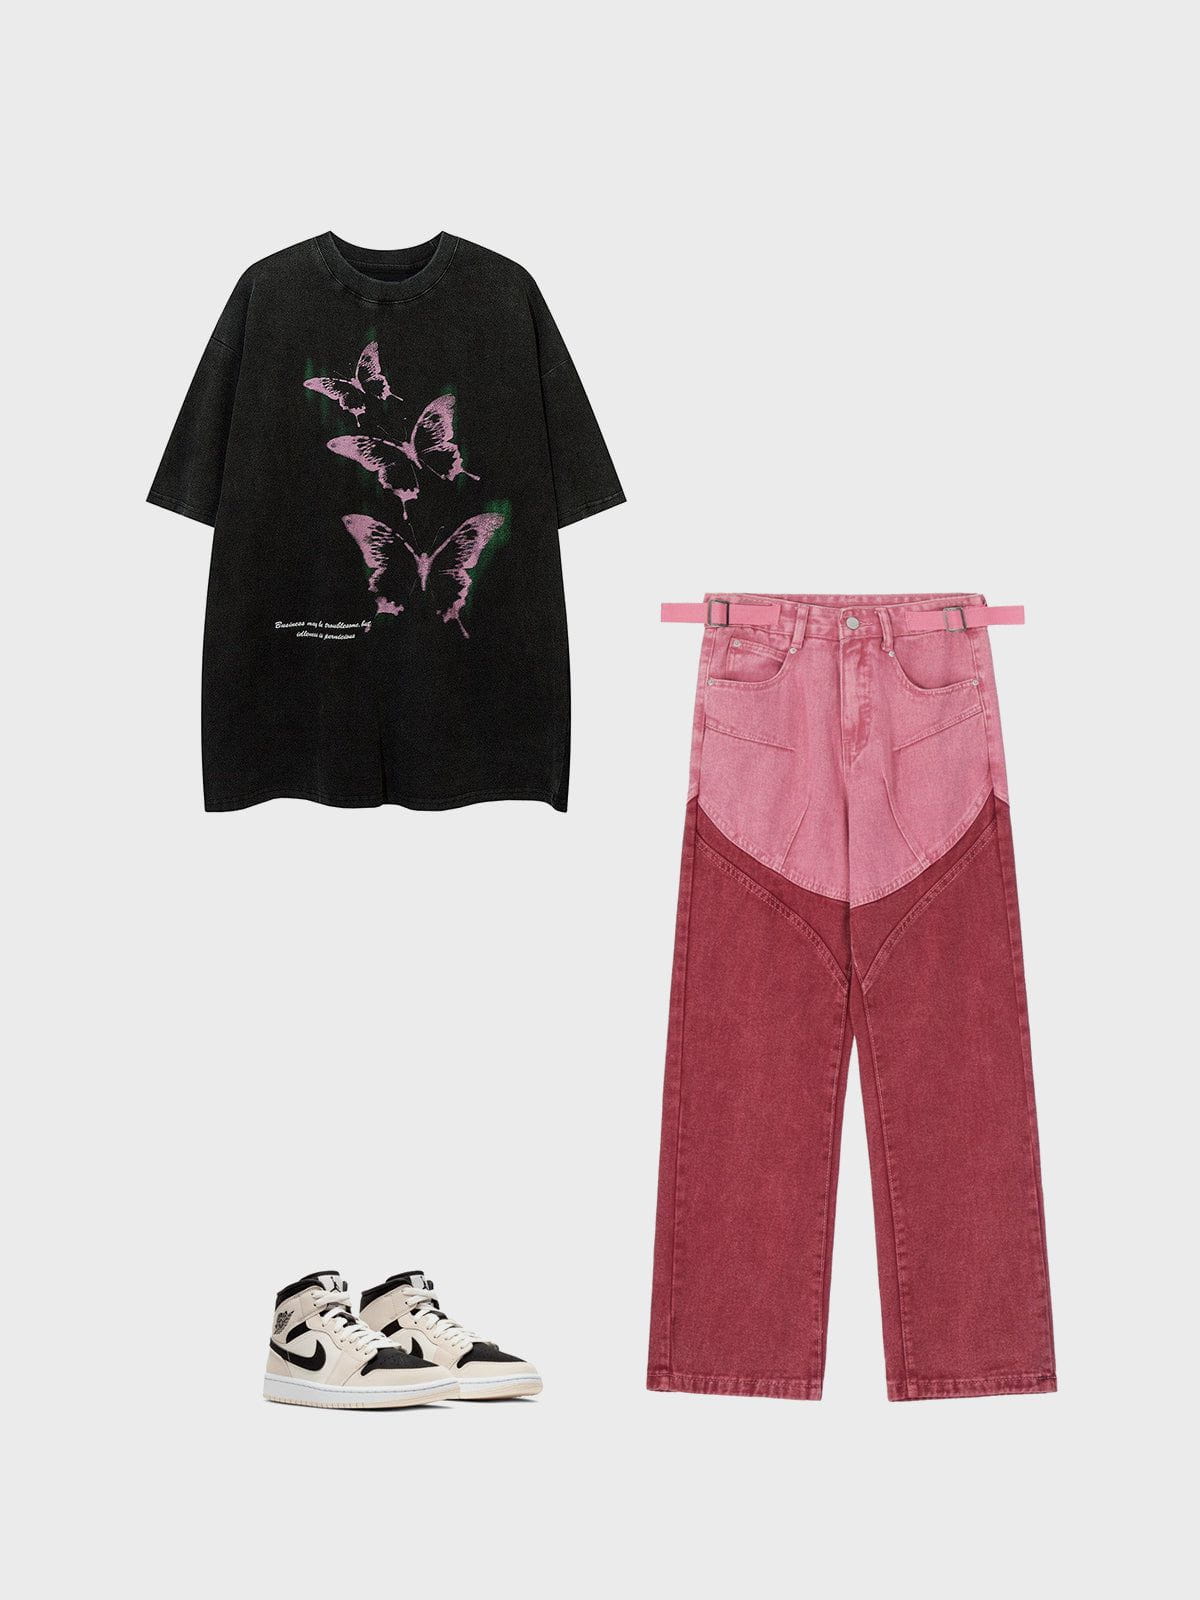 Aelfric Eden Washed Butterfly Graphic Tee